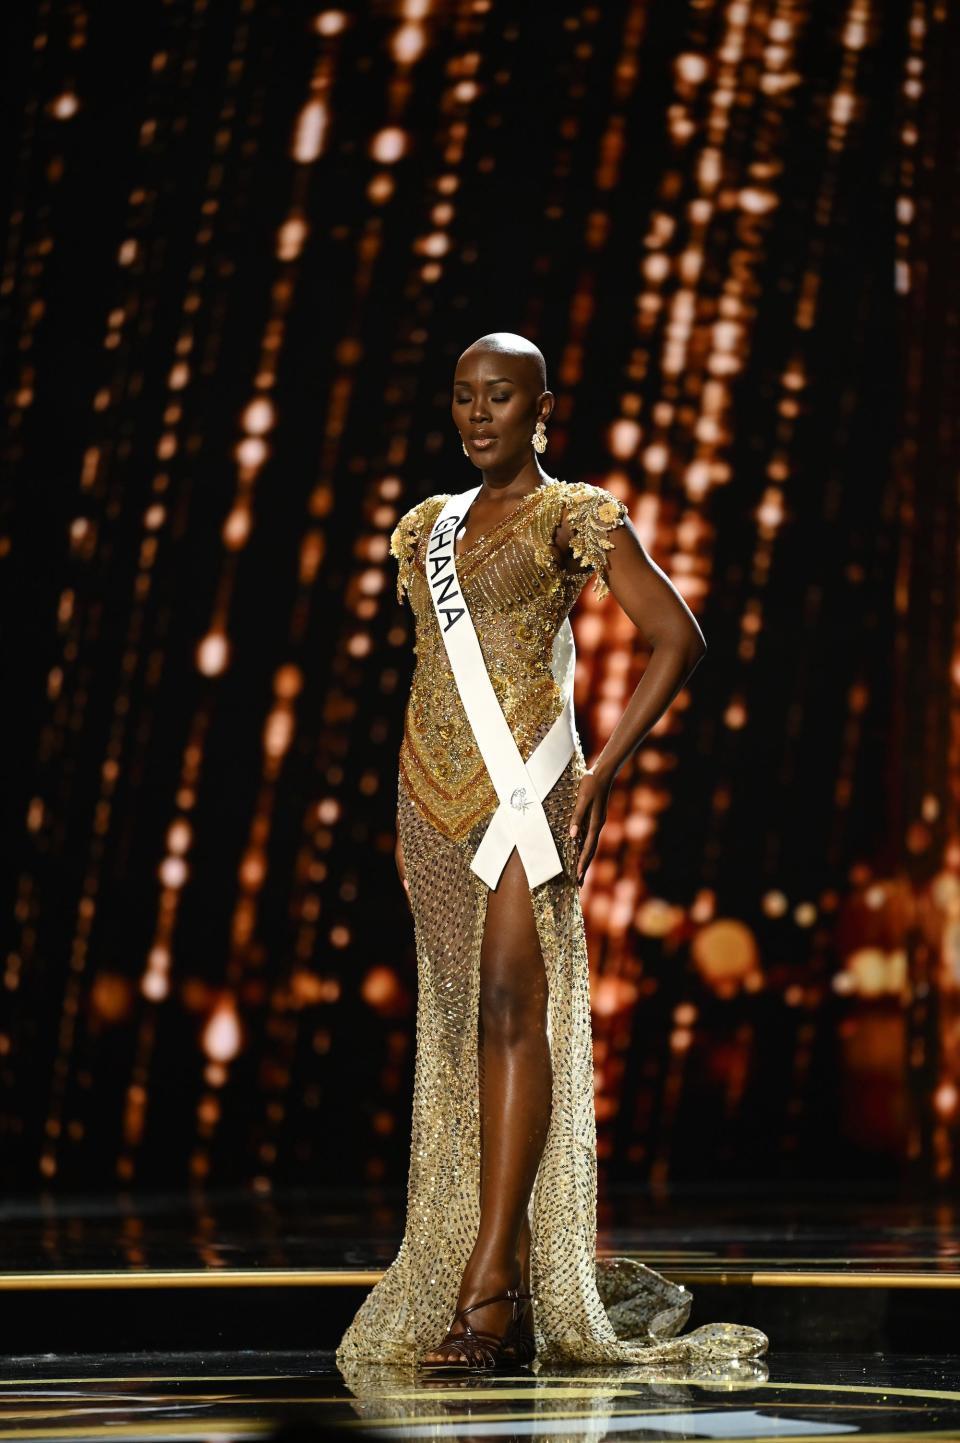 Miss Ghana competes in the 71st annual Miss Universe pageant.